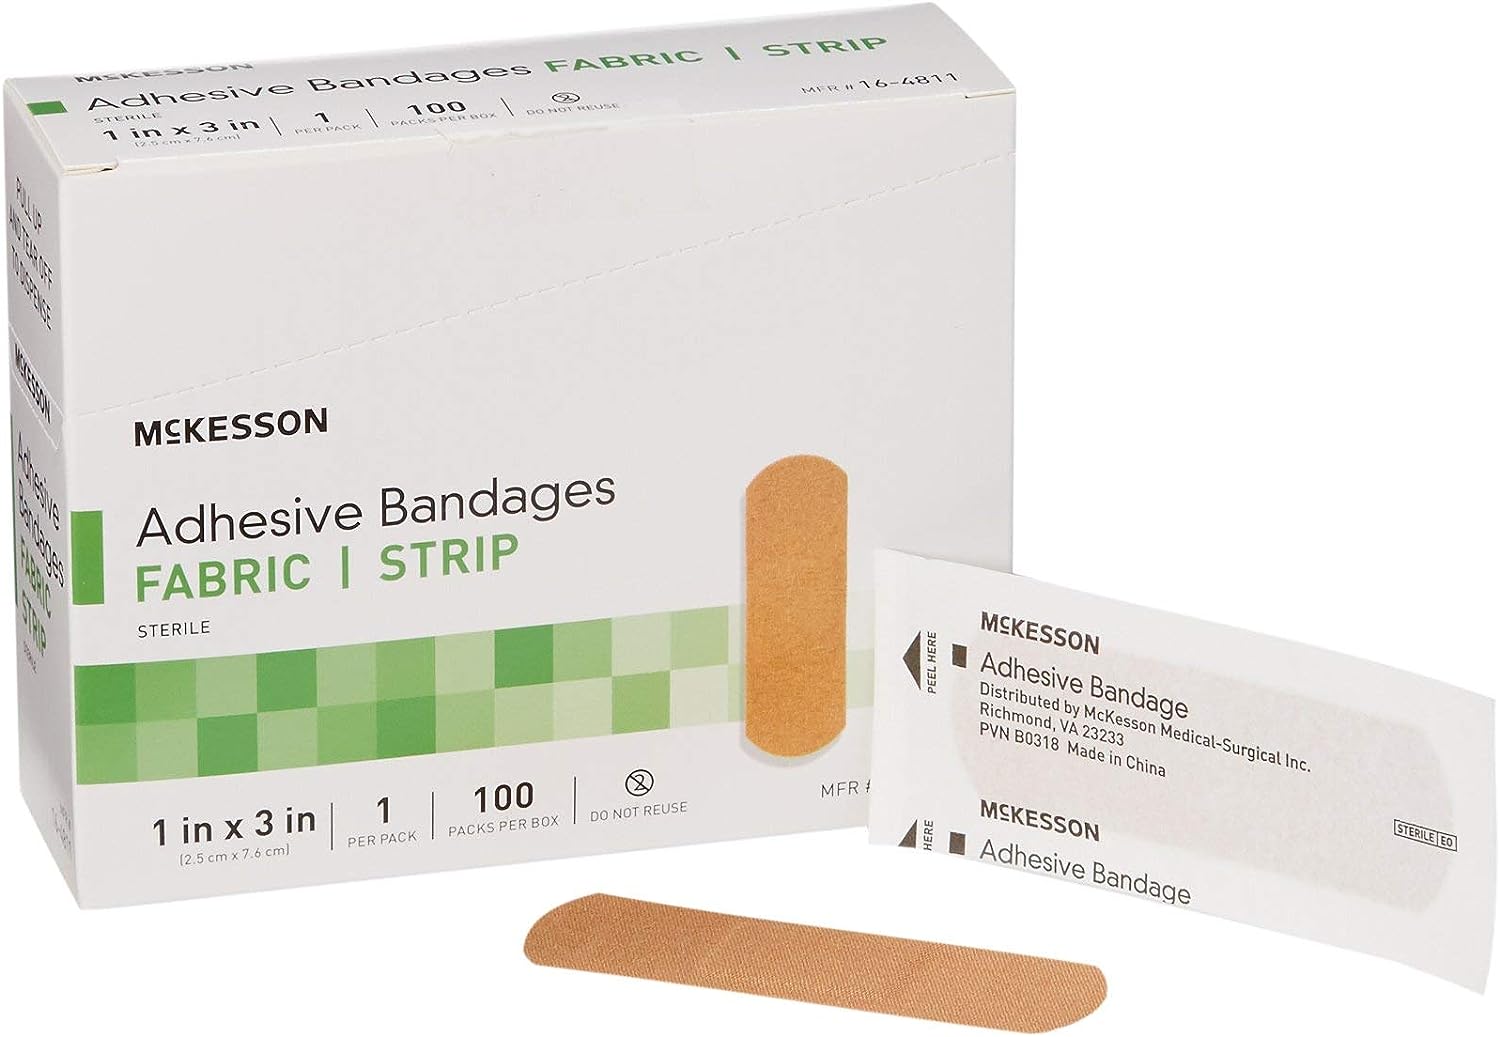 McKesson Adhesive Bandages, Sterile, Fabric Strip, 1 in x 3 in, 100 Count, 4 Packs, 400 Total